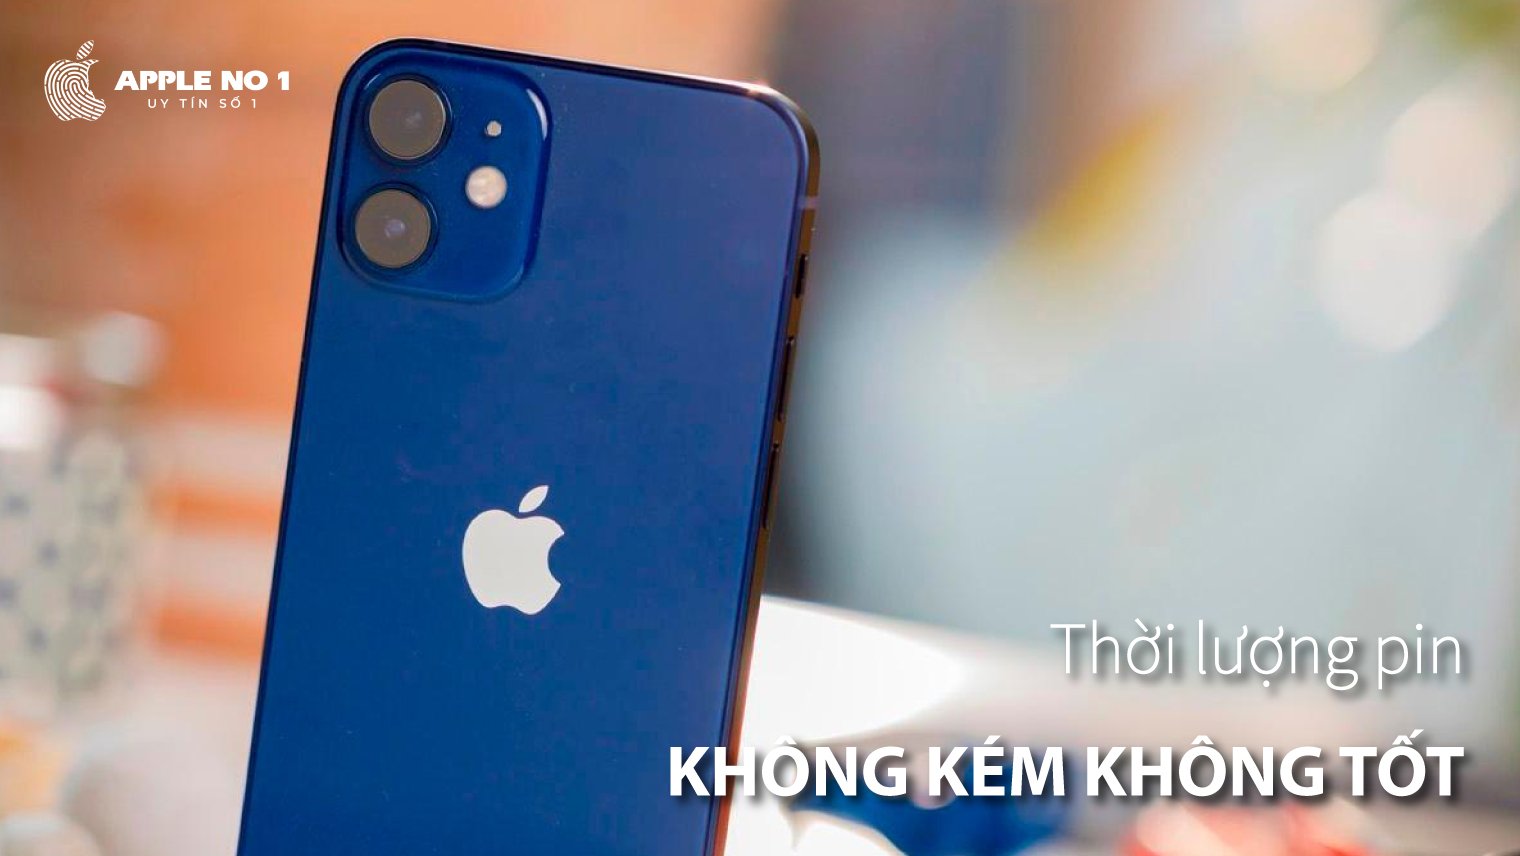 iphone 12 mini review tren tay nhanh ve thoi luong pin